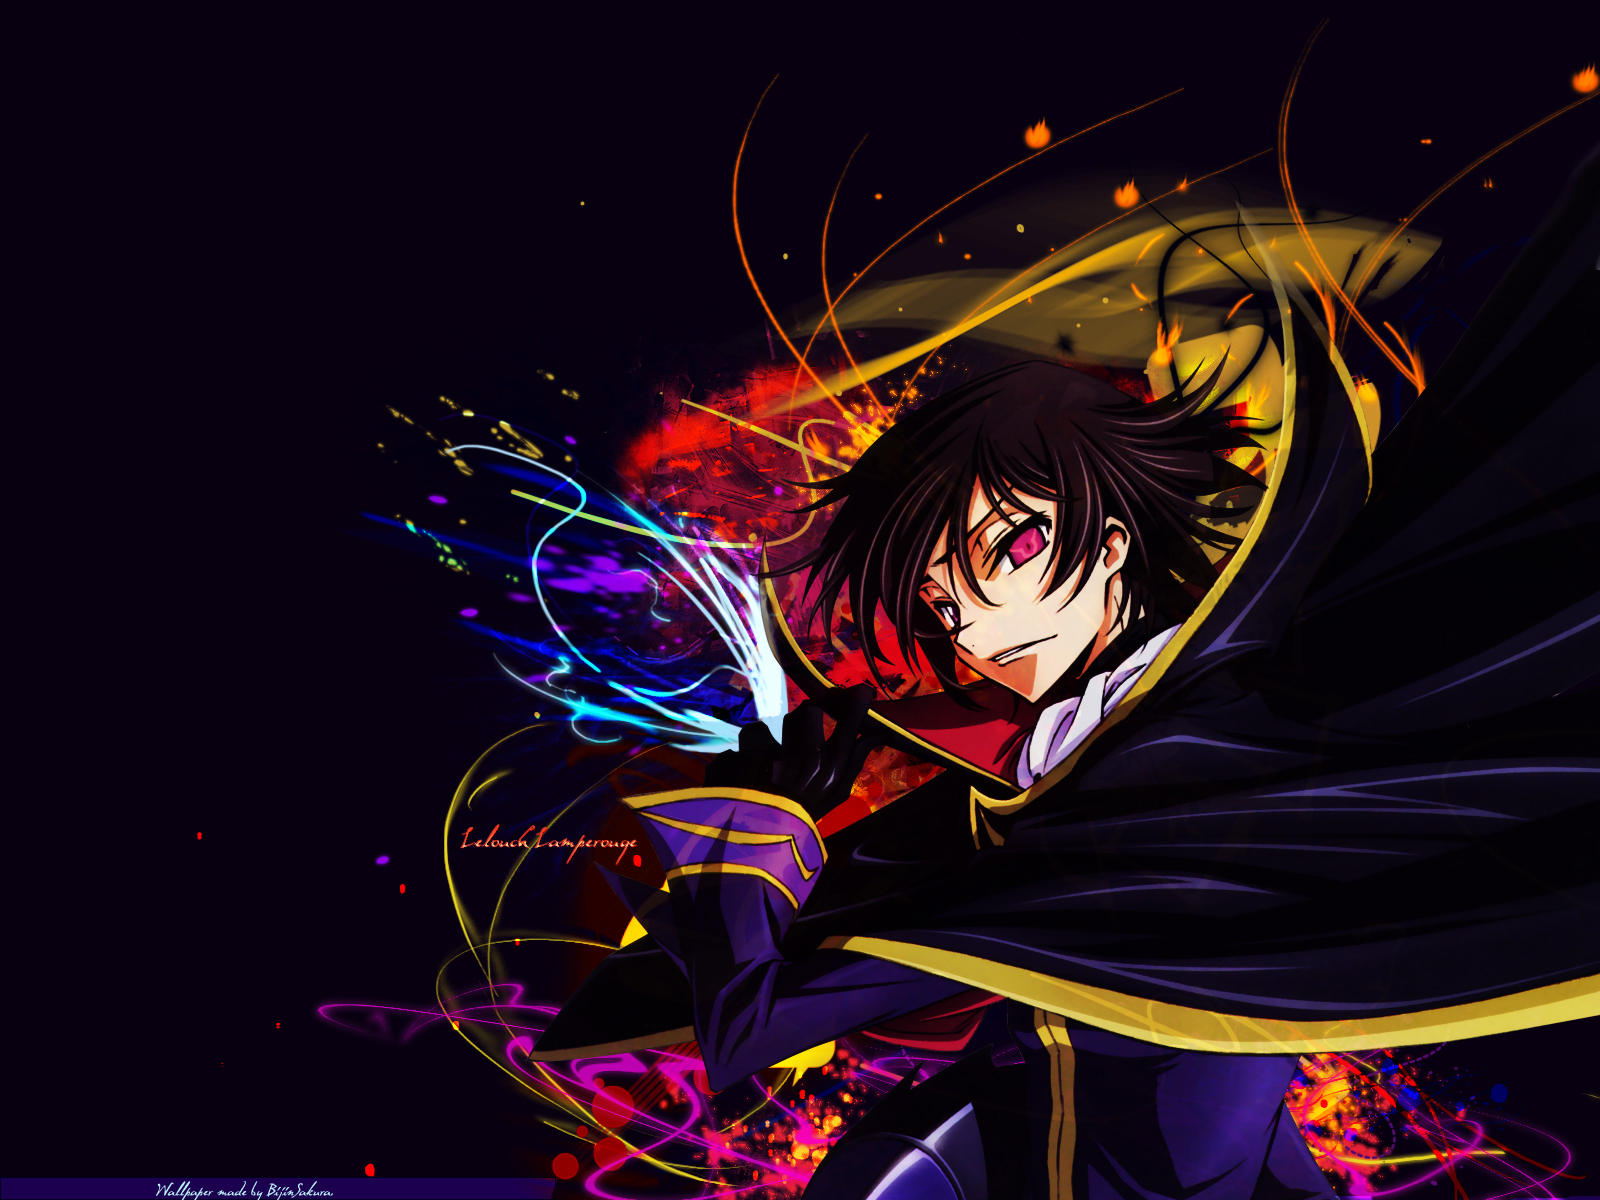 Wallpaper Code Geass 14426 high quality Backgrounds for mobile iphone